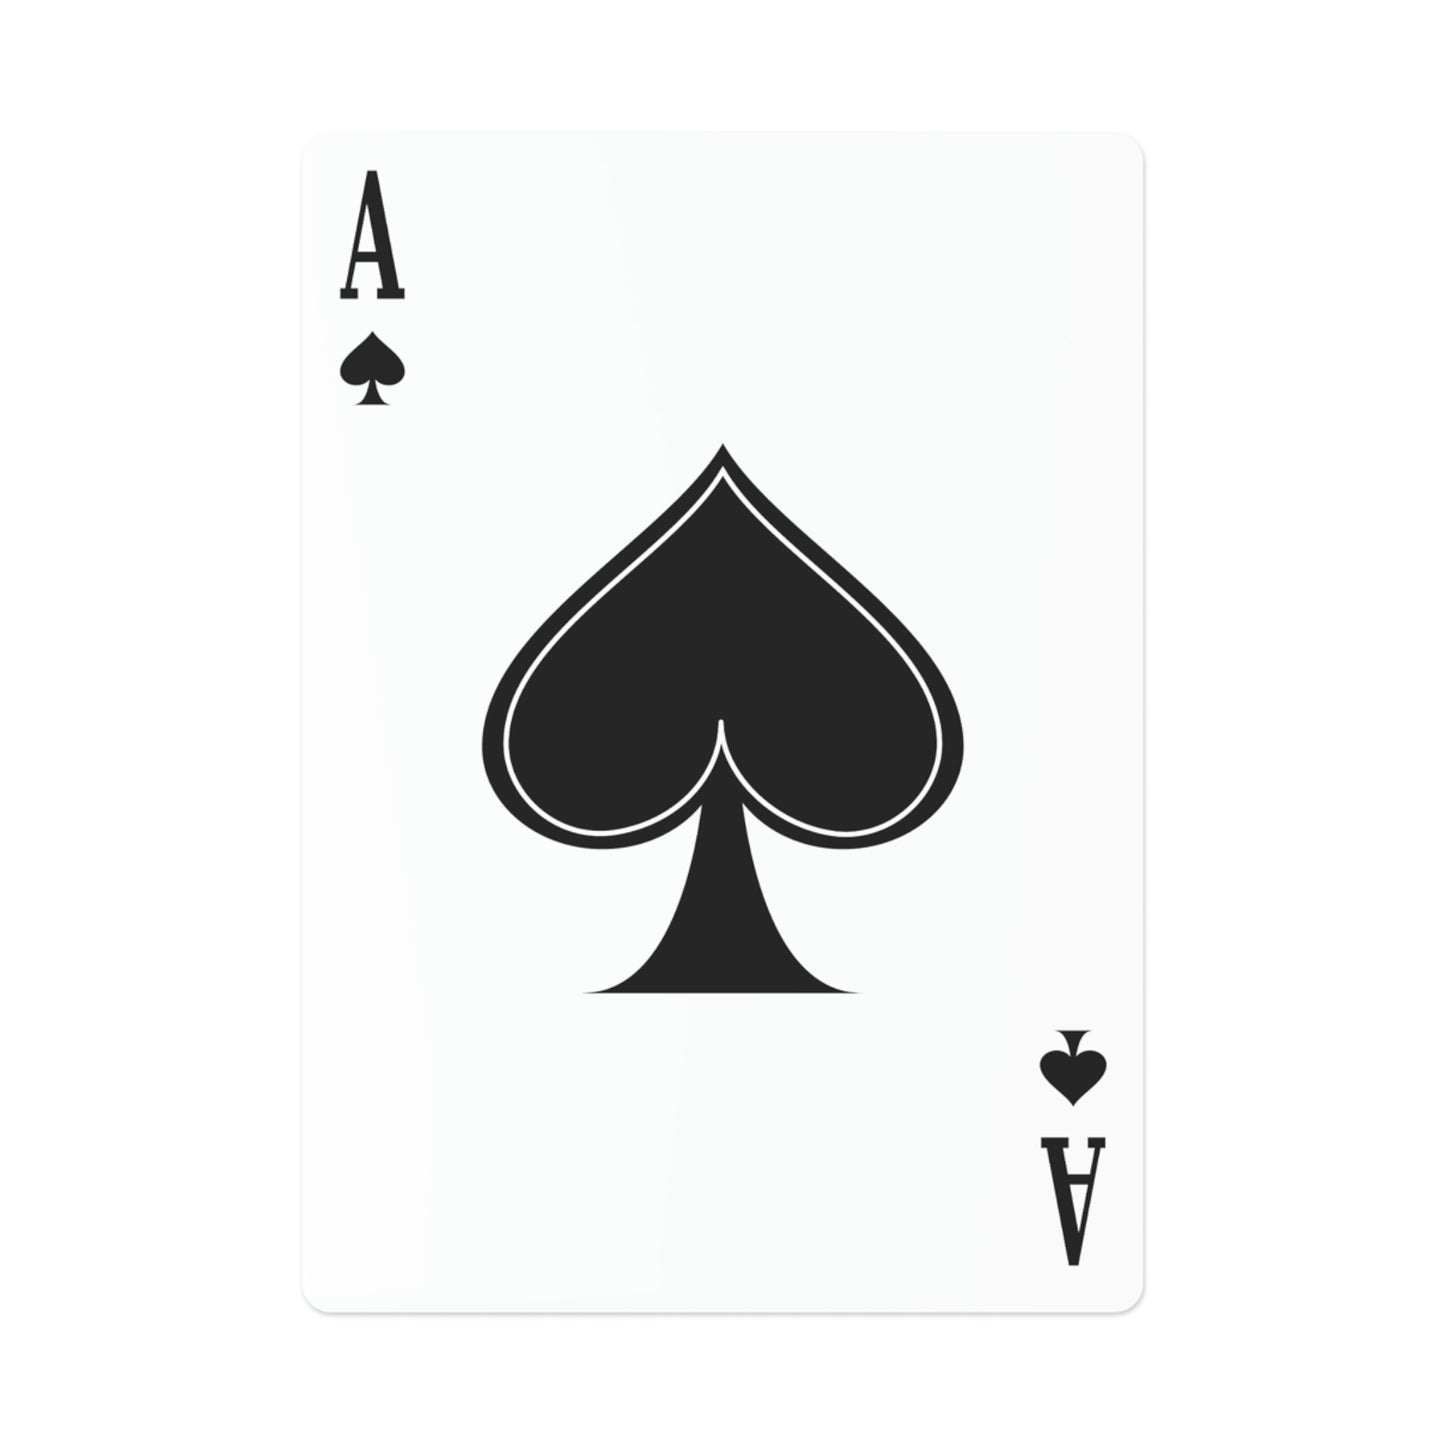 Puzzles LTD Red Playing Cards